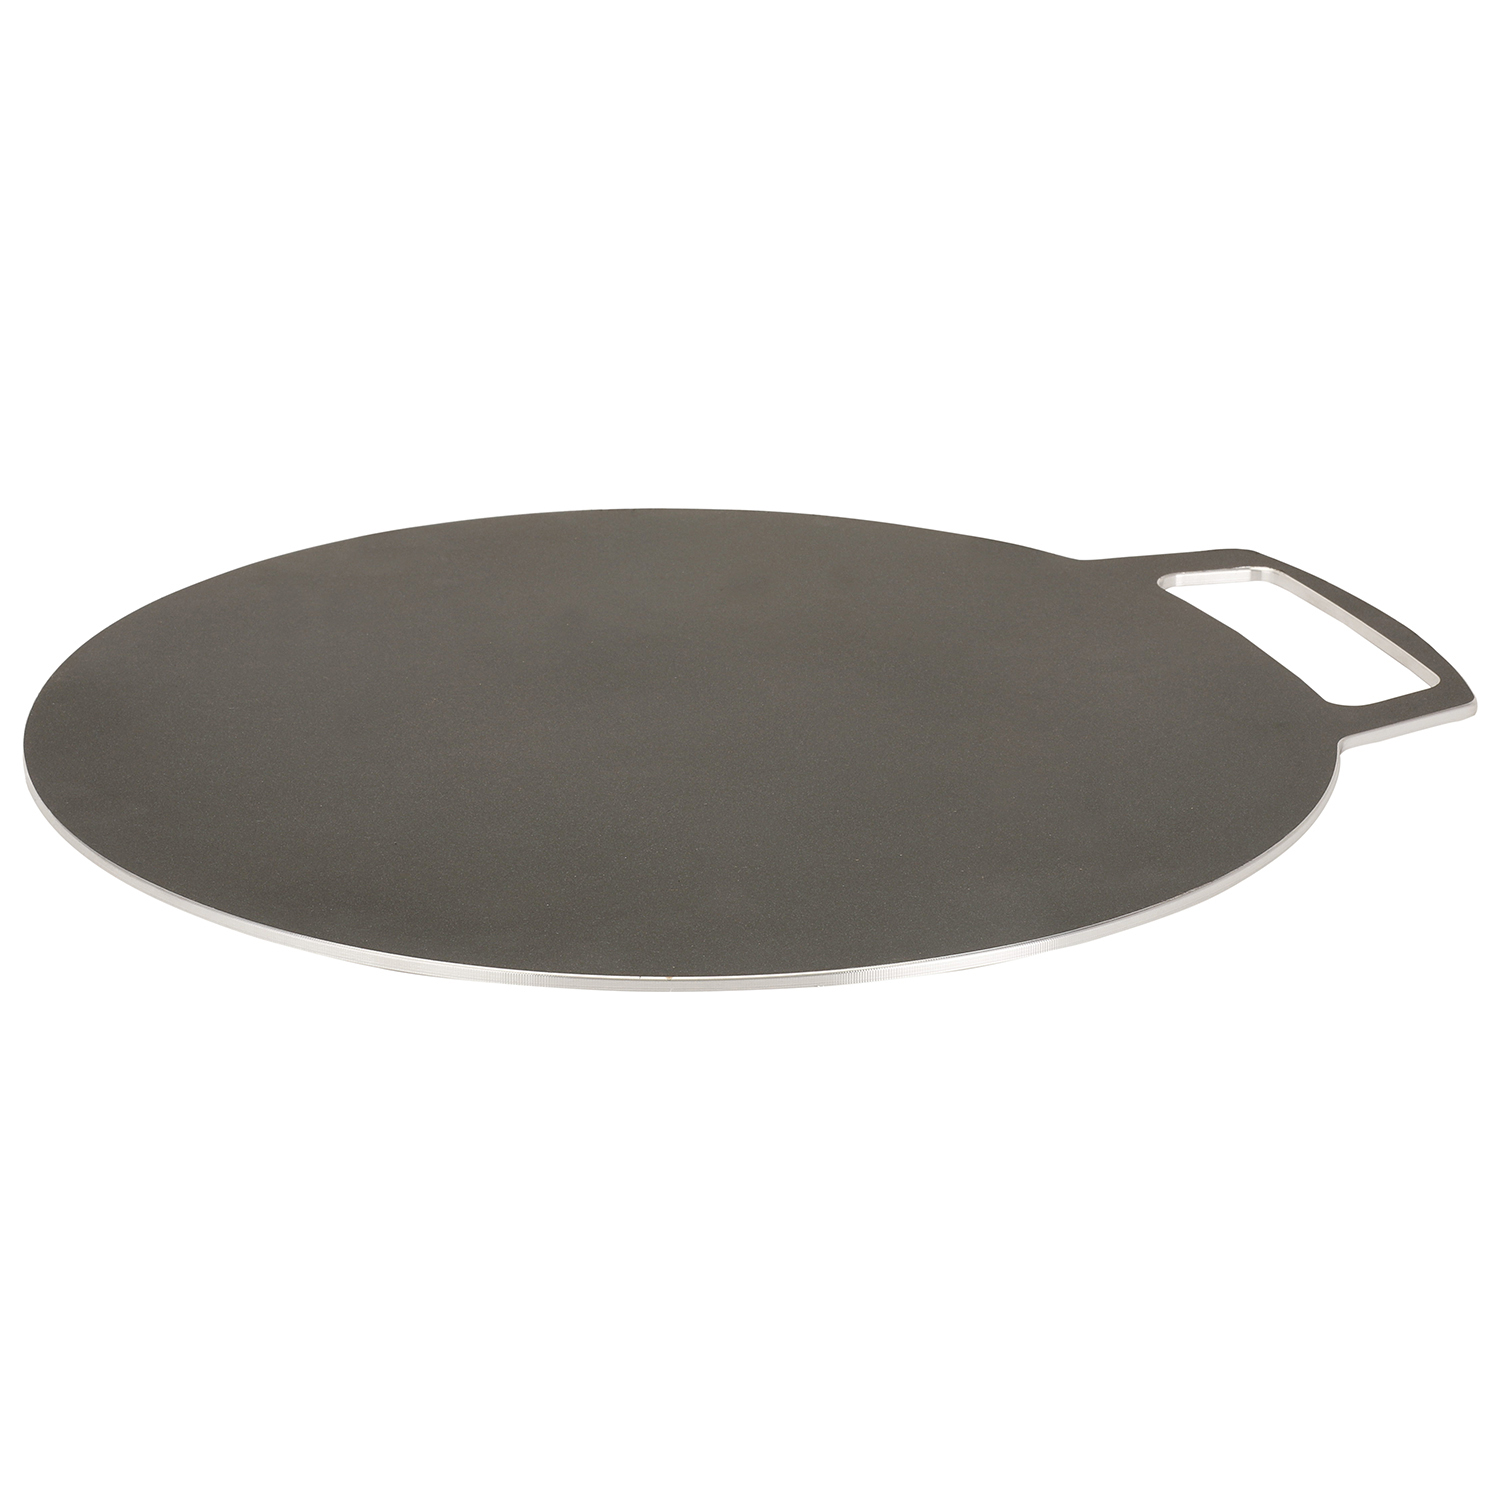 Diameter 12 inch Royalford Non-Stick Tawa Aluminum Round Baking Stone/Cooking Griddle for Pizza Scones Chapatti Pre-Seasoned Non-Stick Surface Pancakes 30cm Roti or Naan Bread 